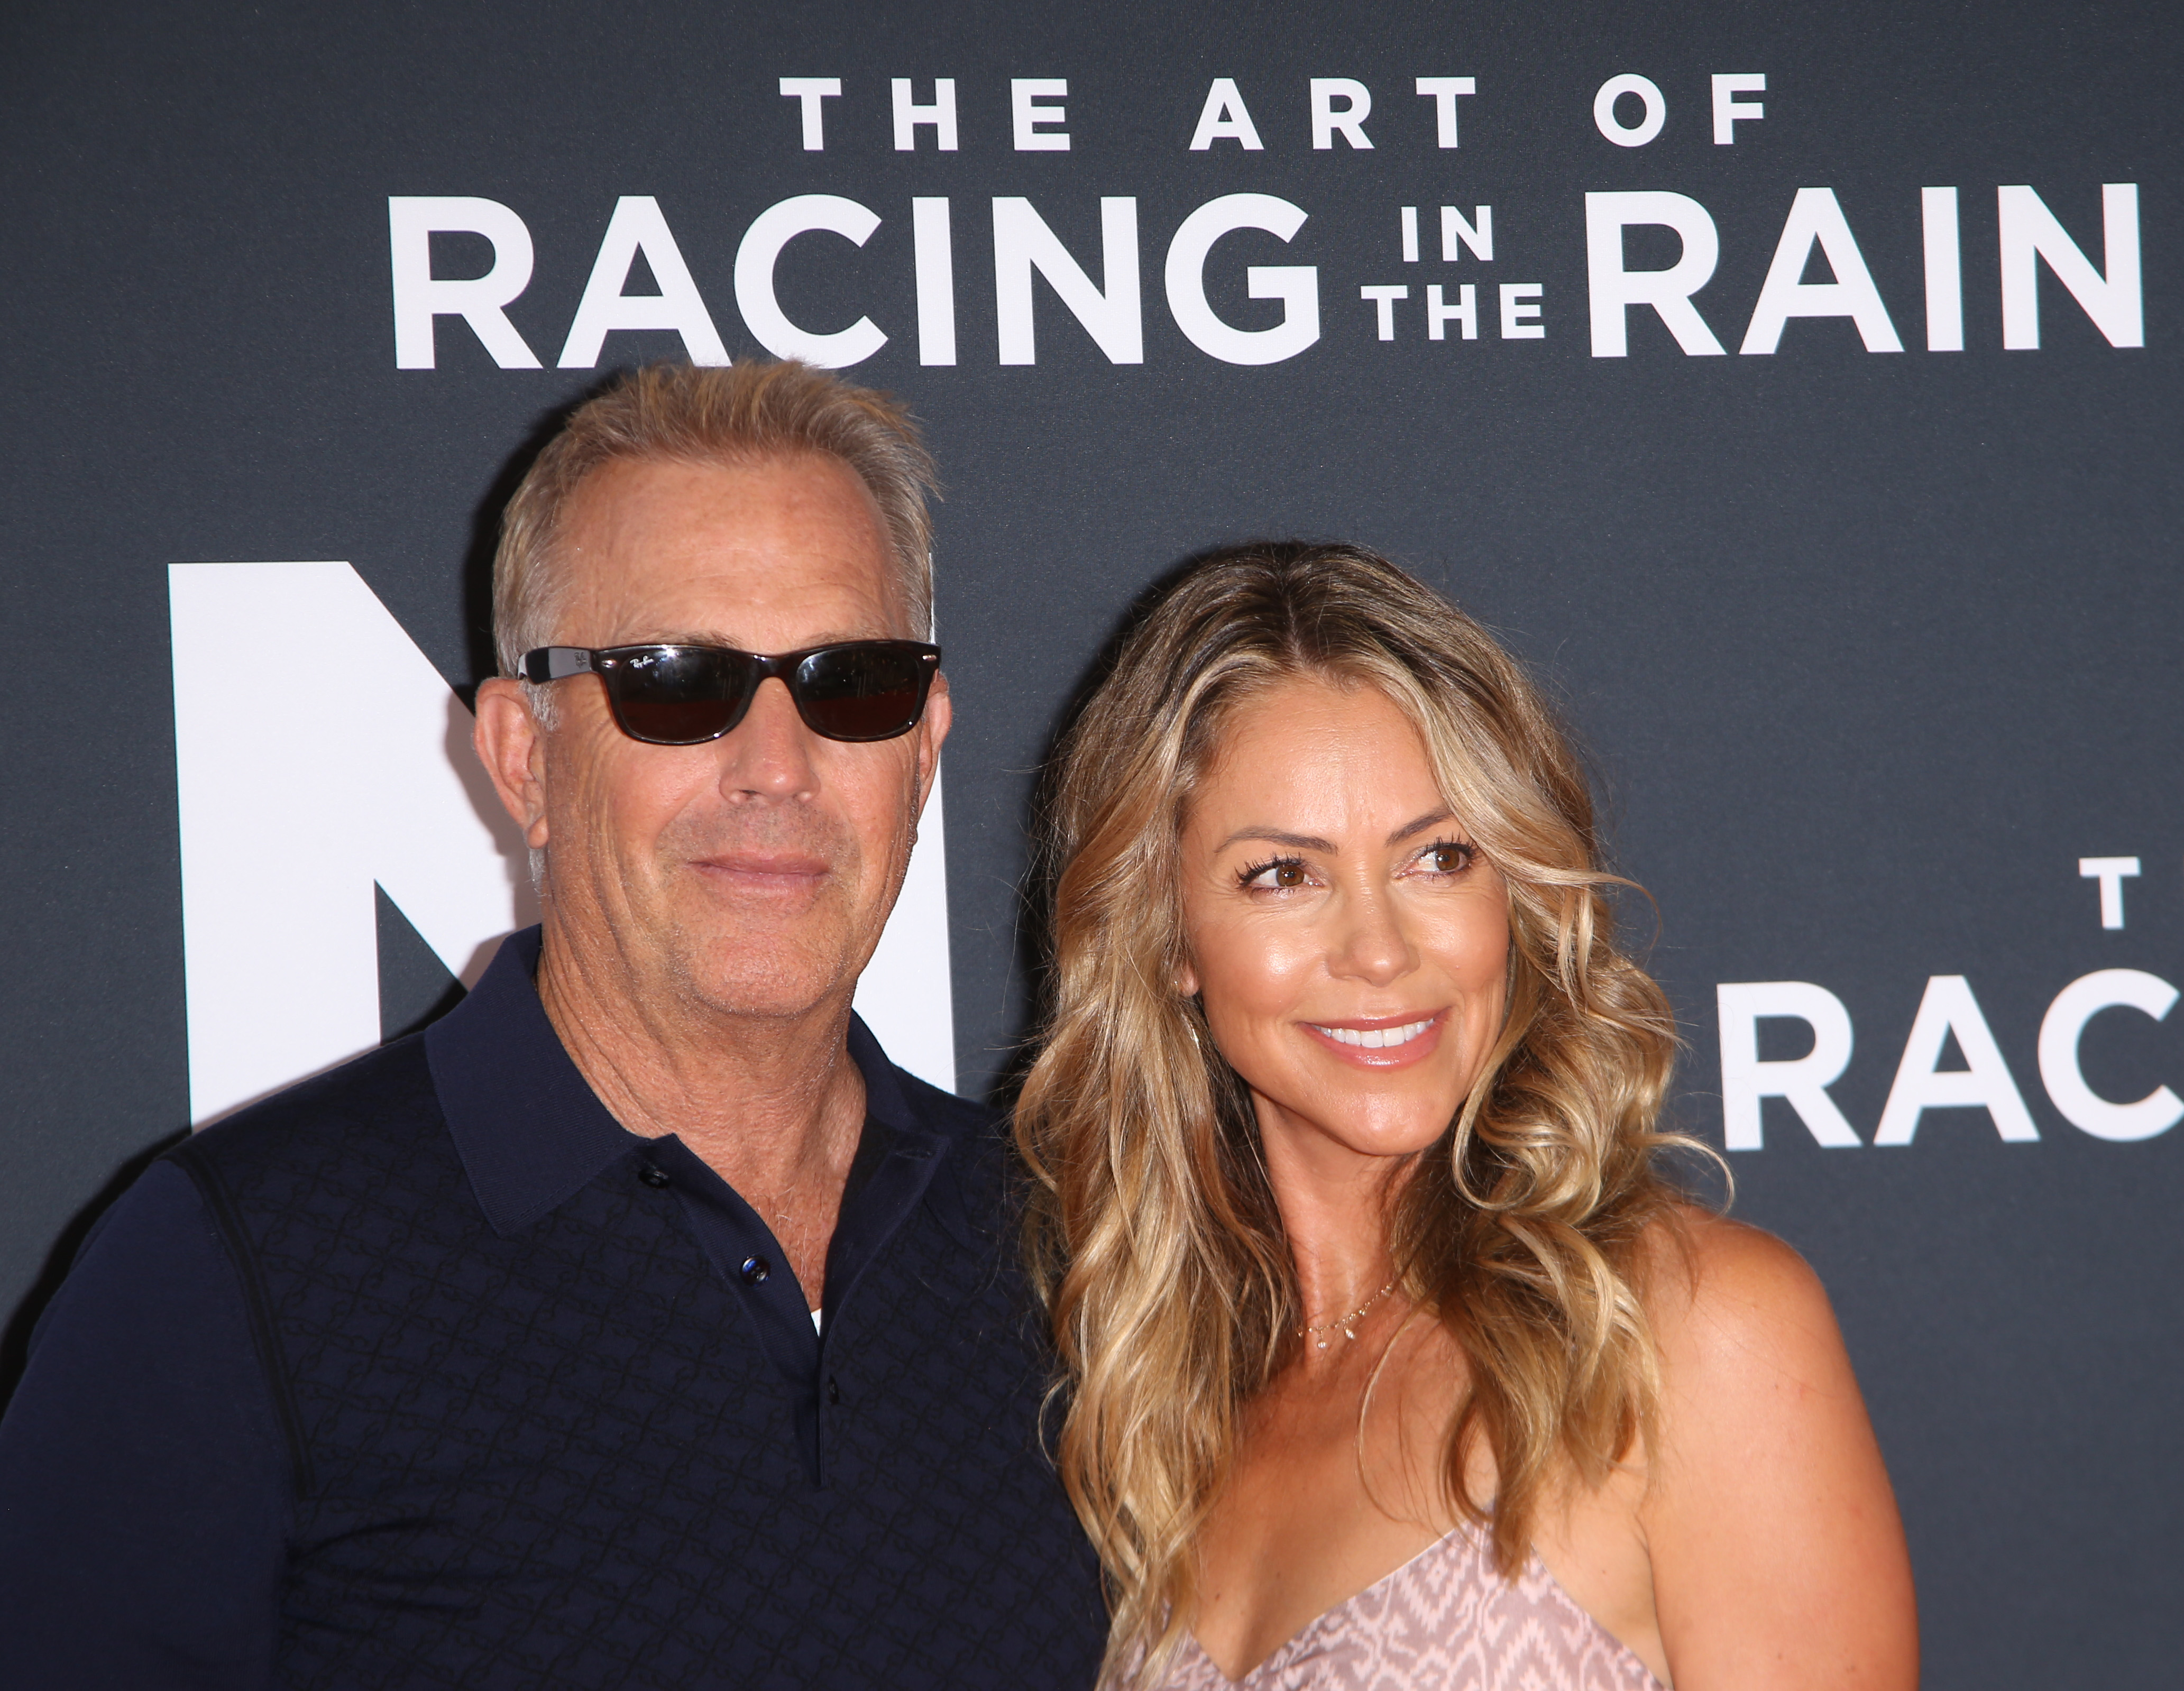 Kevin Costner and Christine Baumgartner at the Los Angeles premiere of "The Art of Racing In The Rain" on August 1, 2019, in Los Angeles, California | Source: Getty Images